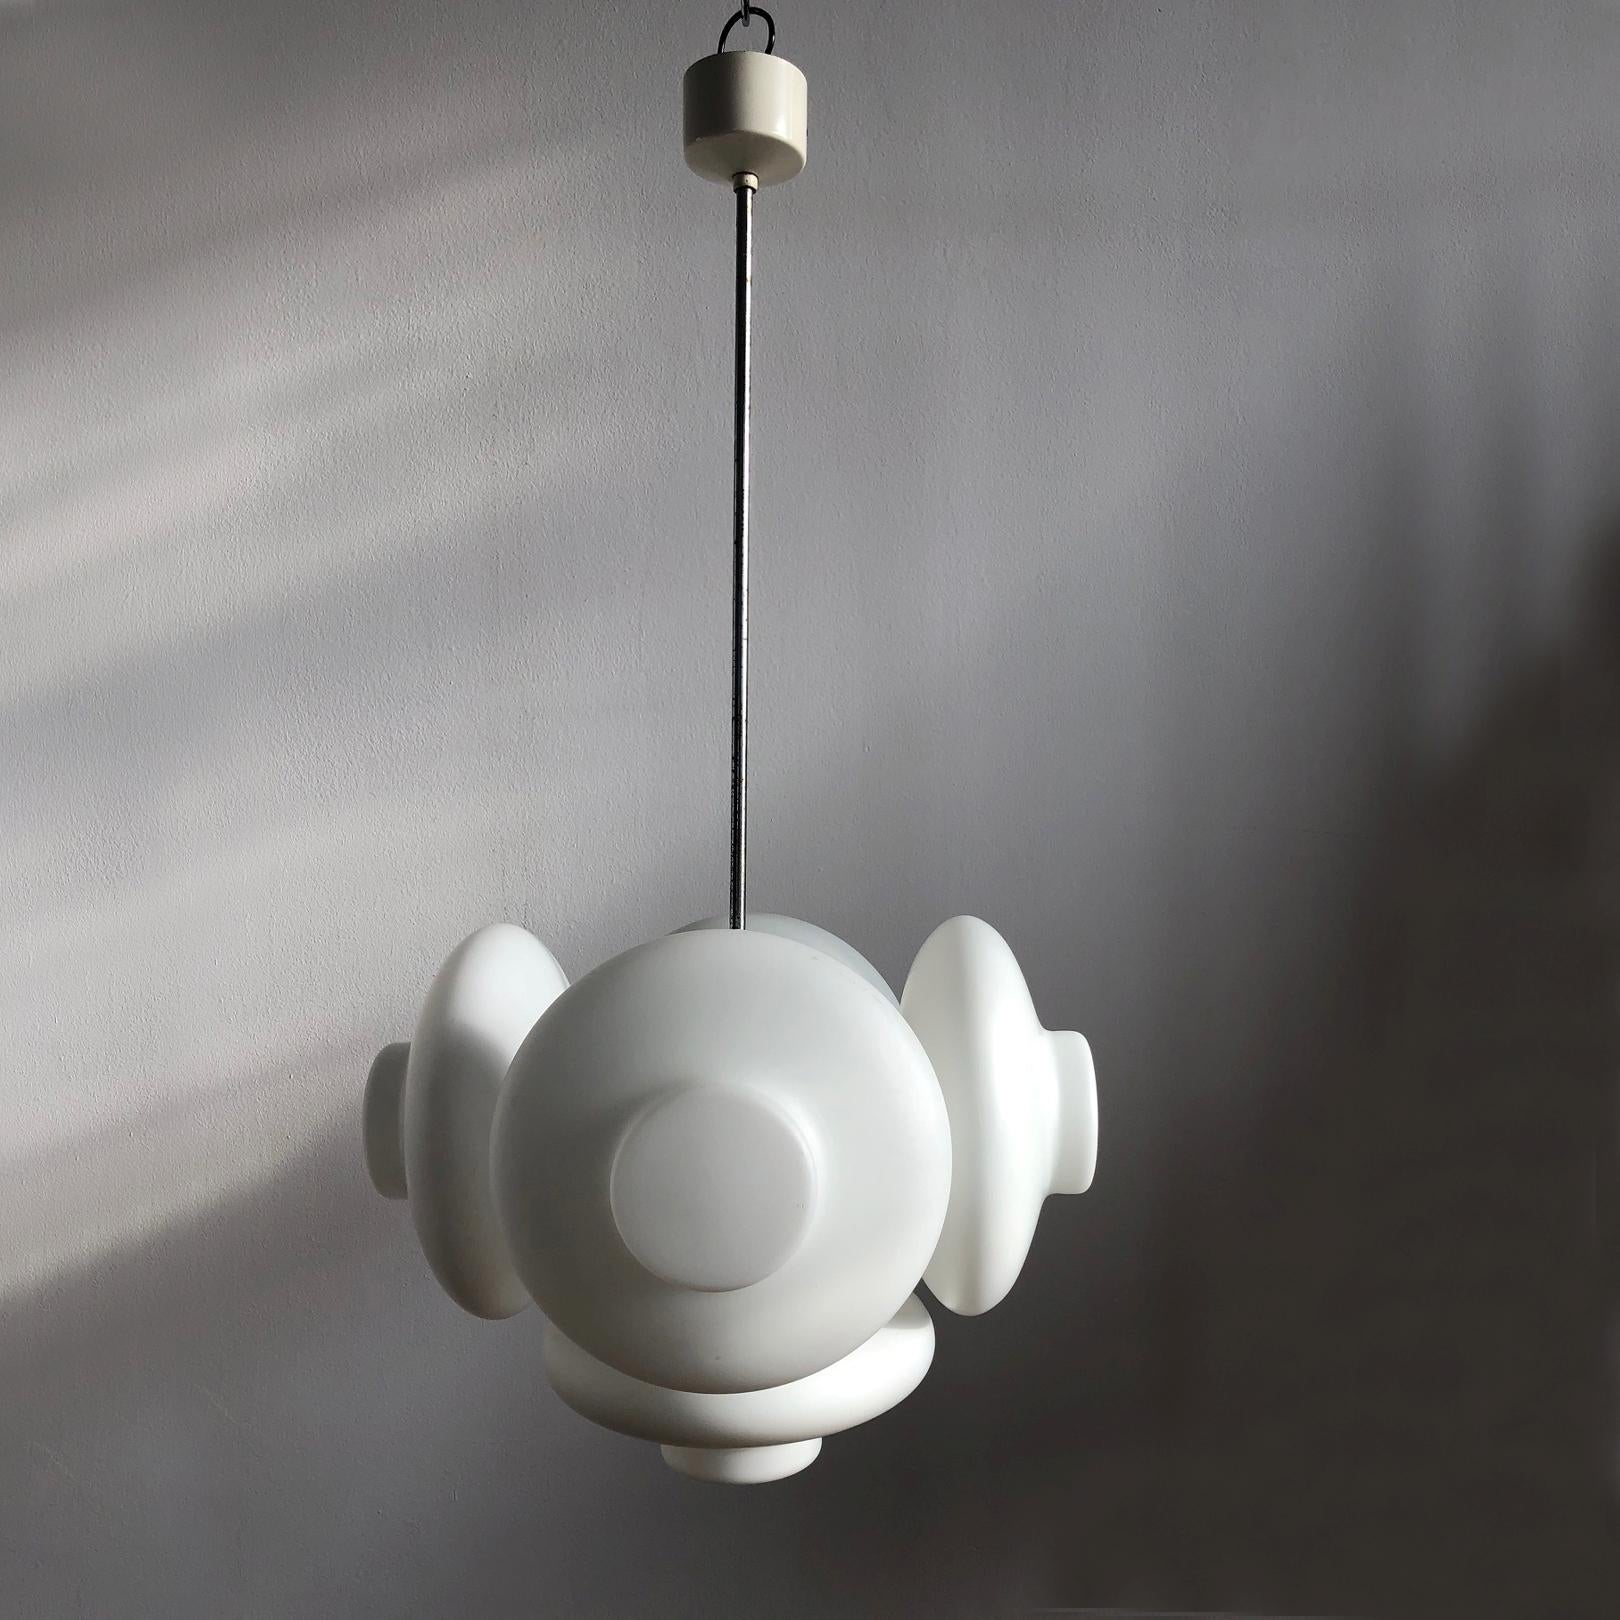 Unusual hanging lamp signed Napako. Five lampshades are made of milk glass and gives warm diffused light. The lamp is rewired. The length of the rod can be customized.